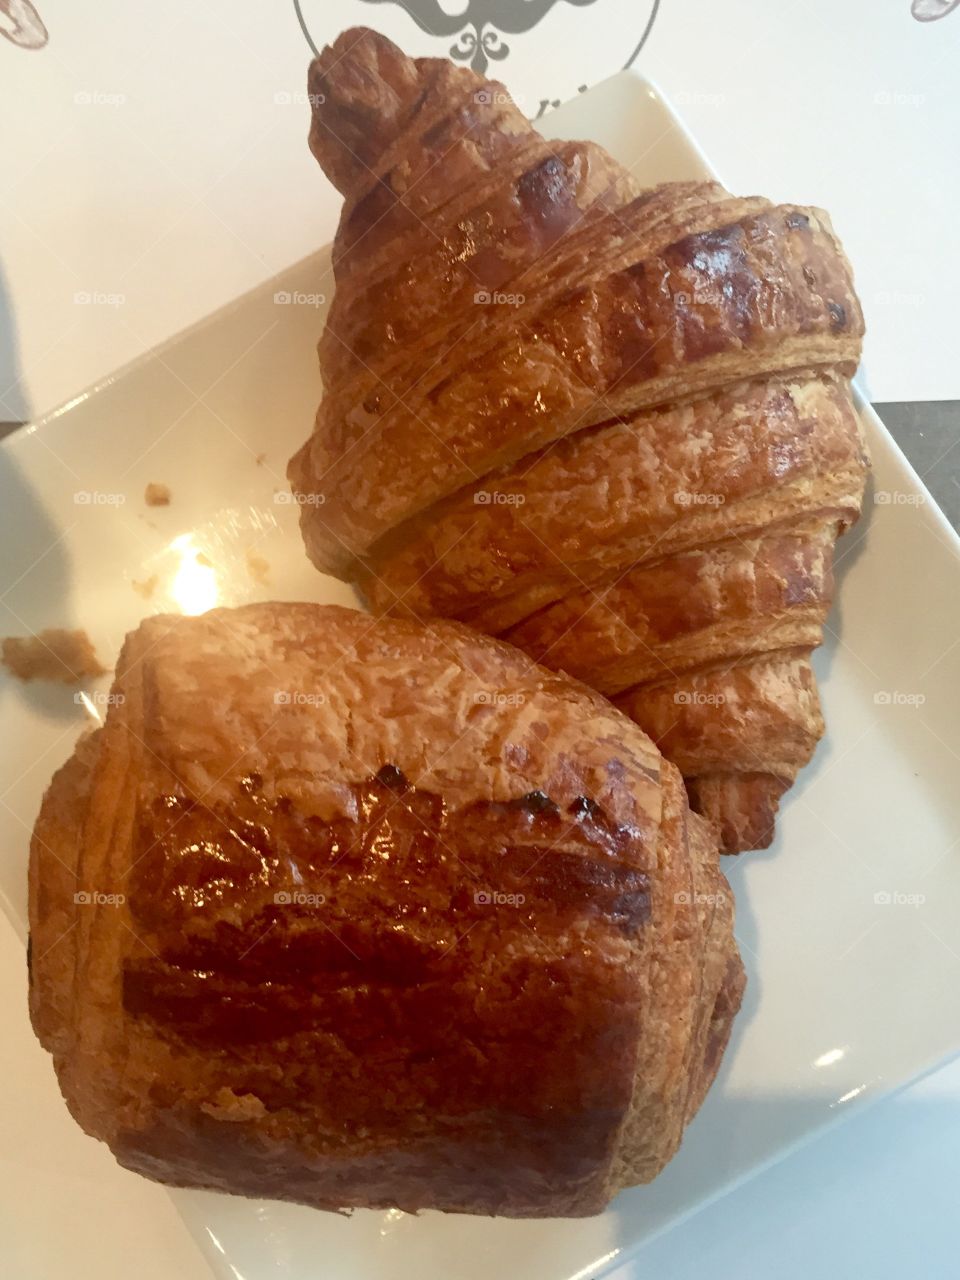 Croissants in Montreal
